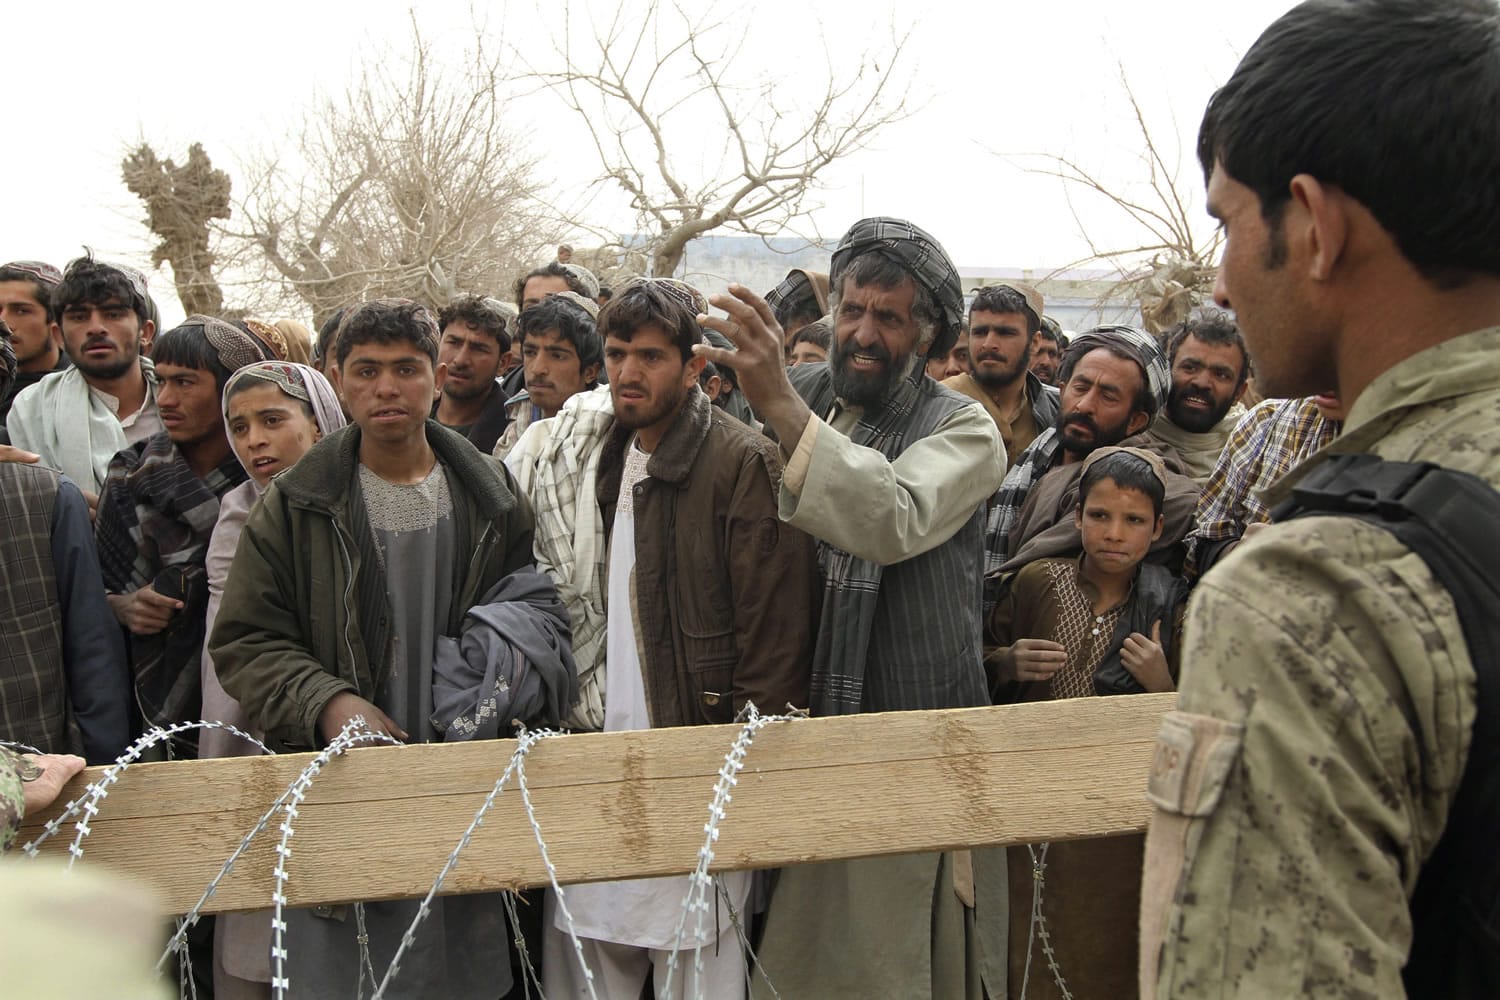 An Afghan soldier speaks to civilians gathered outside a military base in Panjwai, Kandahar province, south of Kabul, Afghanistan, on Sunday. A U.S. Army staff sergeant is accused of killing 16 Afghan civilians, most of them children, and then burning many of the bodies.